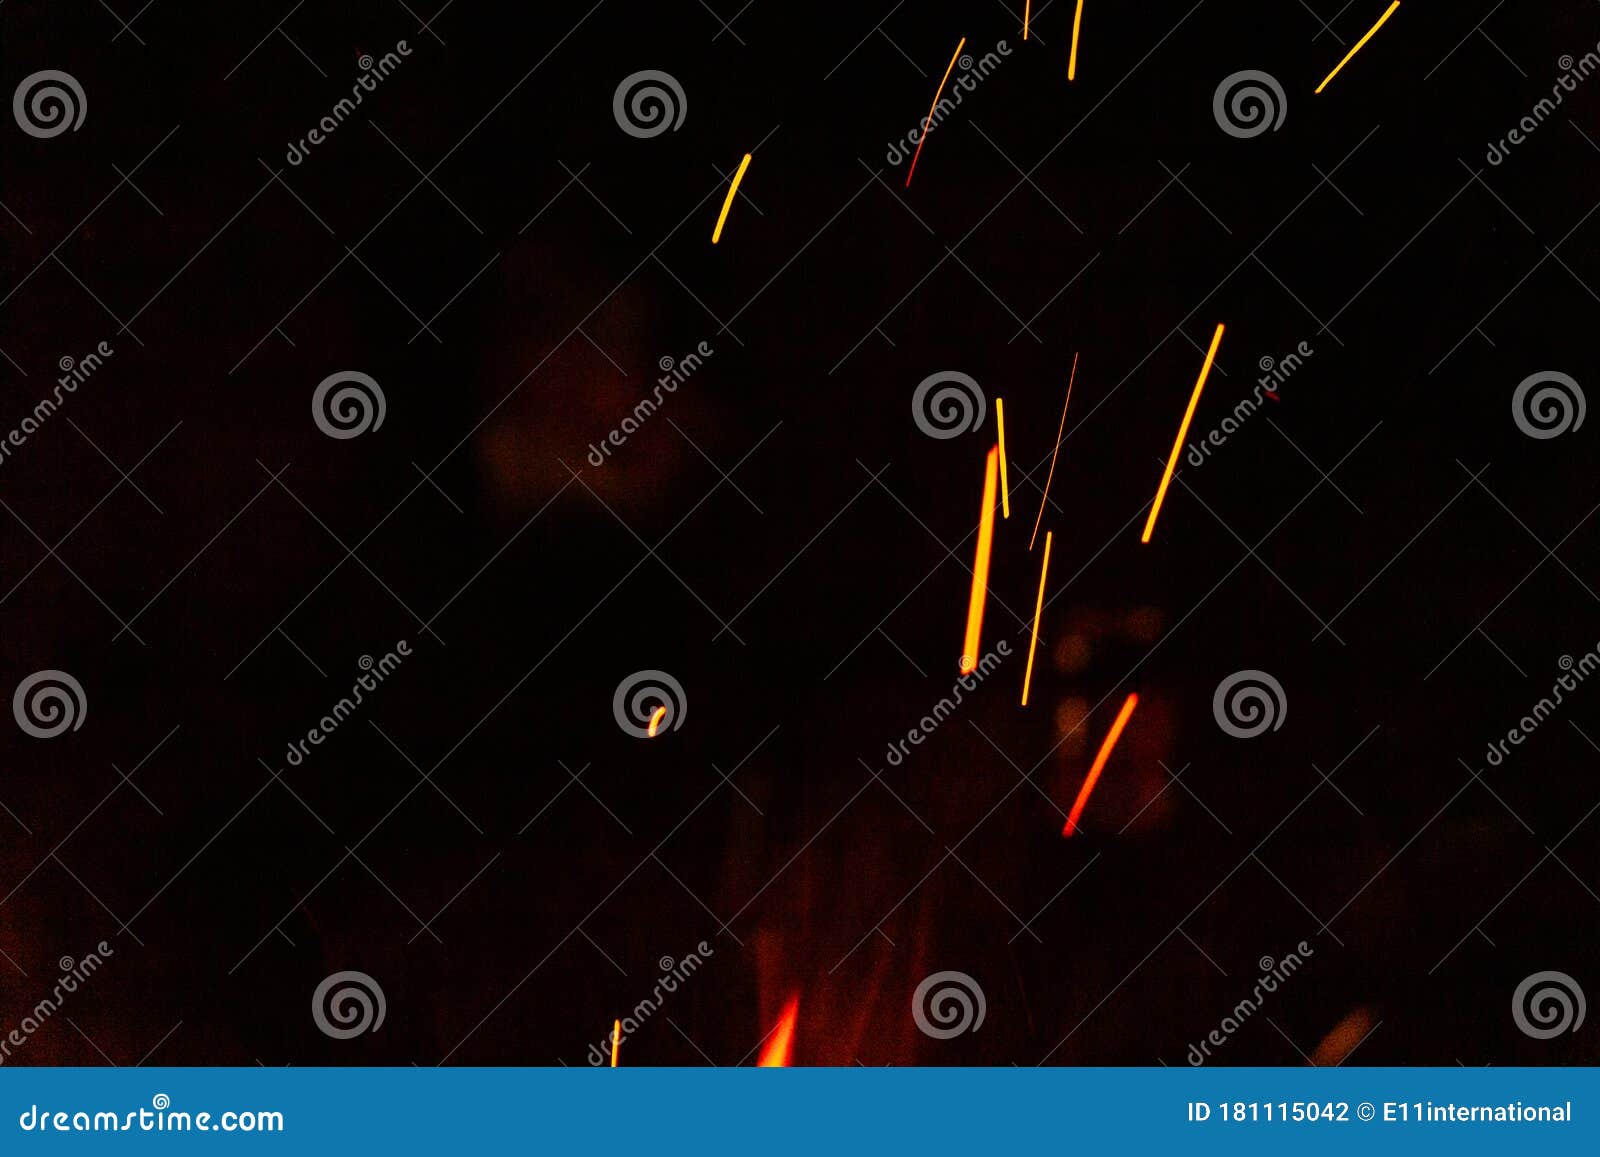 macro tiny fire sparks for digital compositing on black background